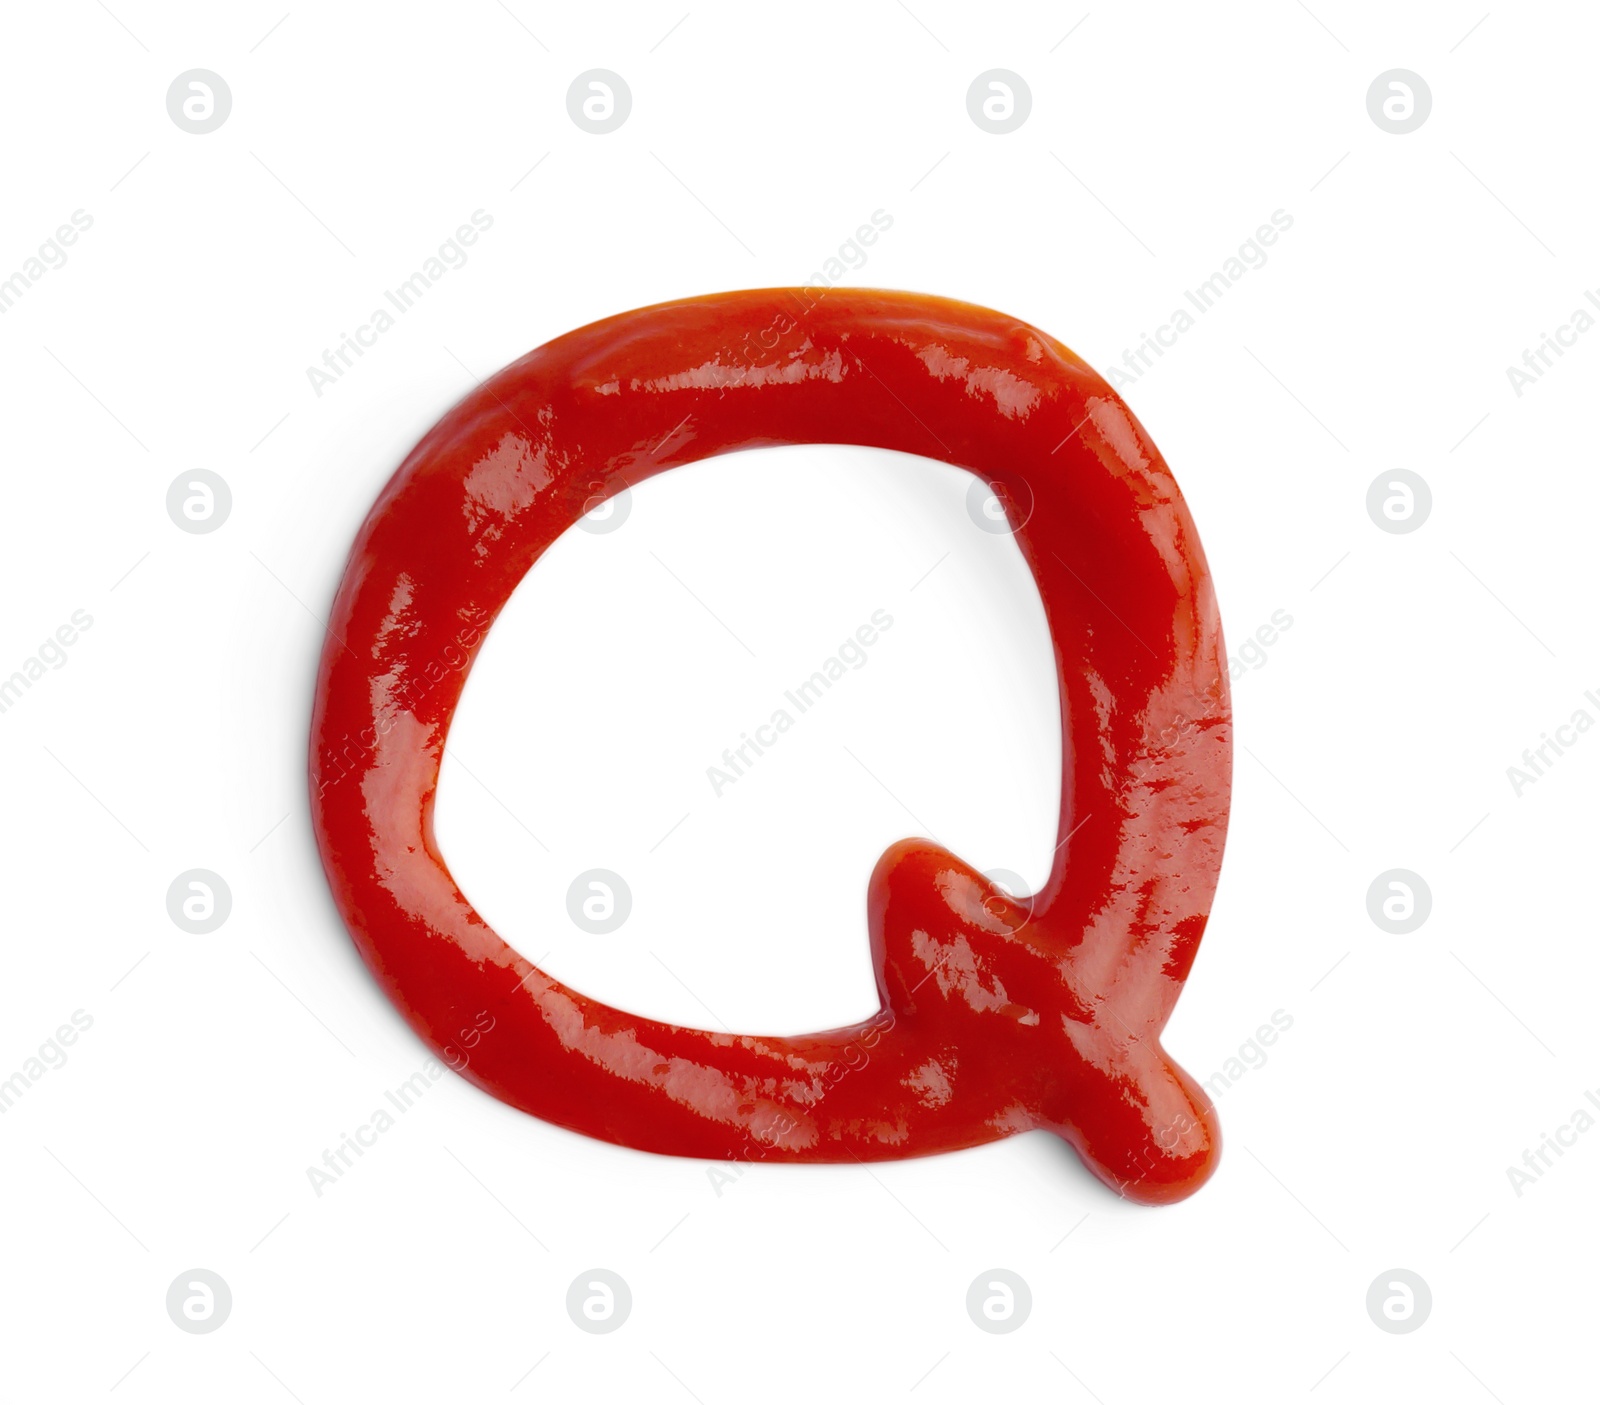 Photo of Letter Q written with ketchup on white background